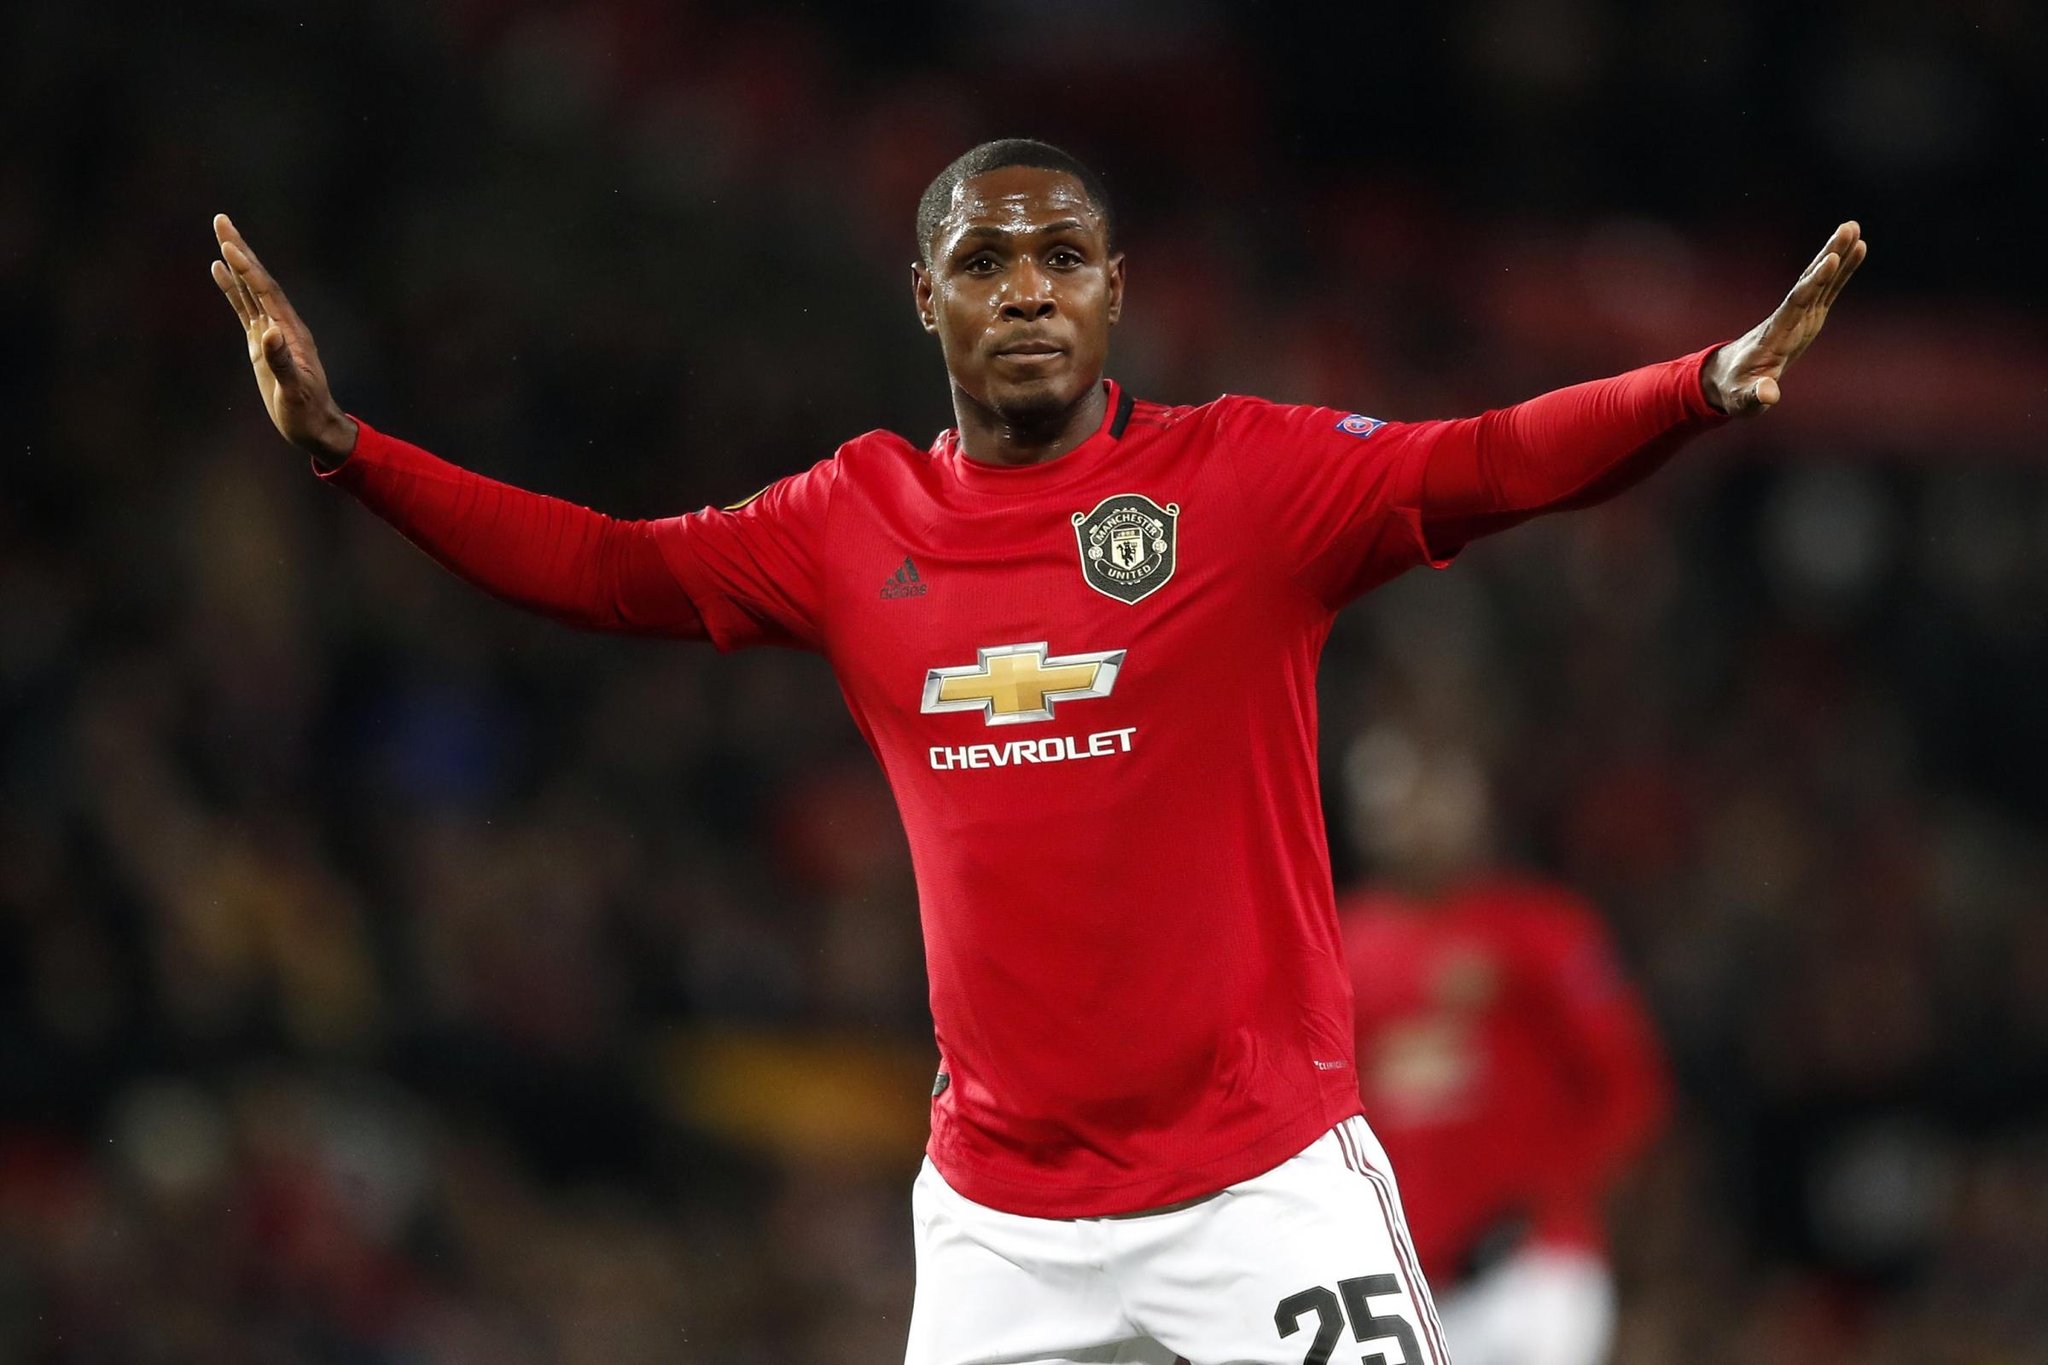 Man Utd reach new loan agreement to keep Odion Ighalo until 2021